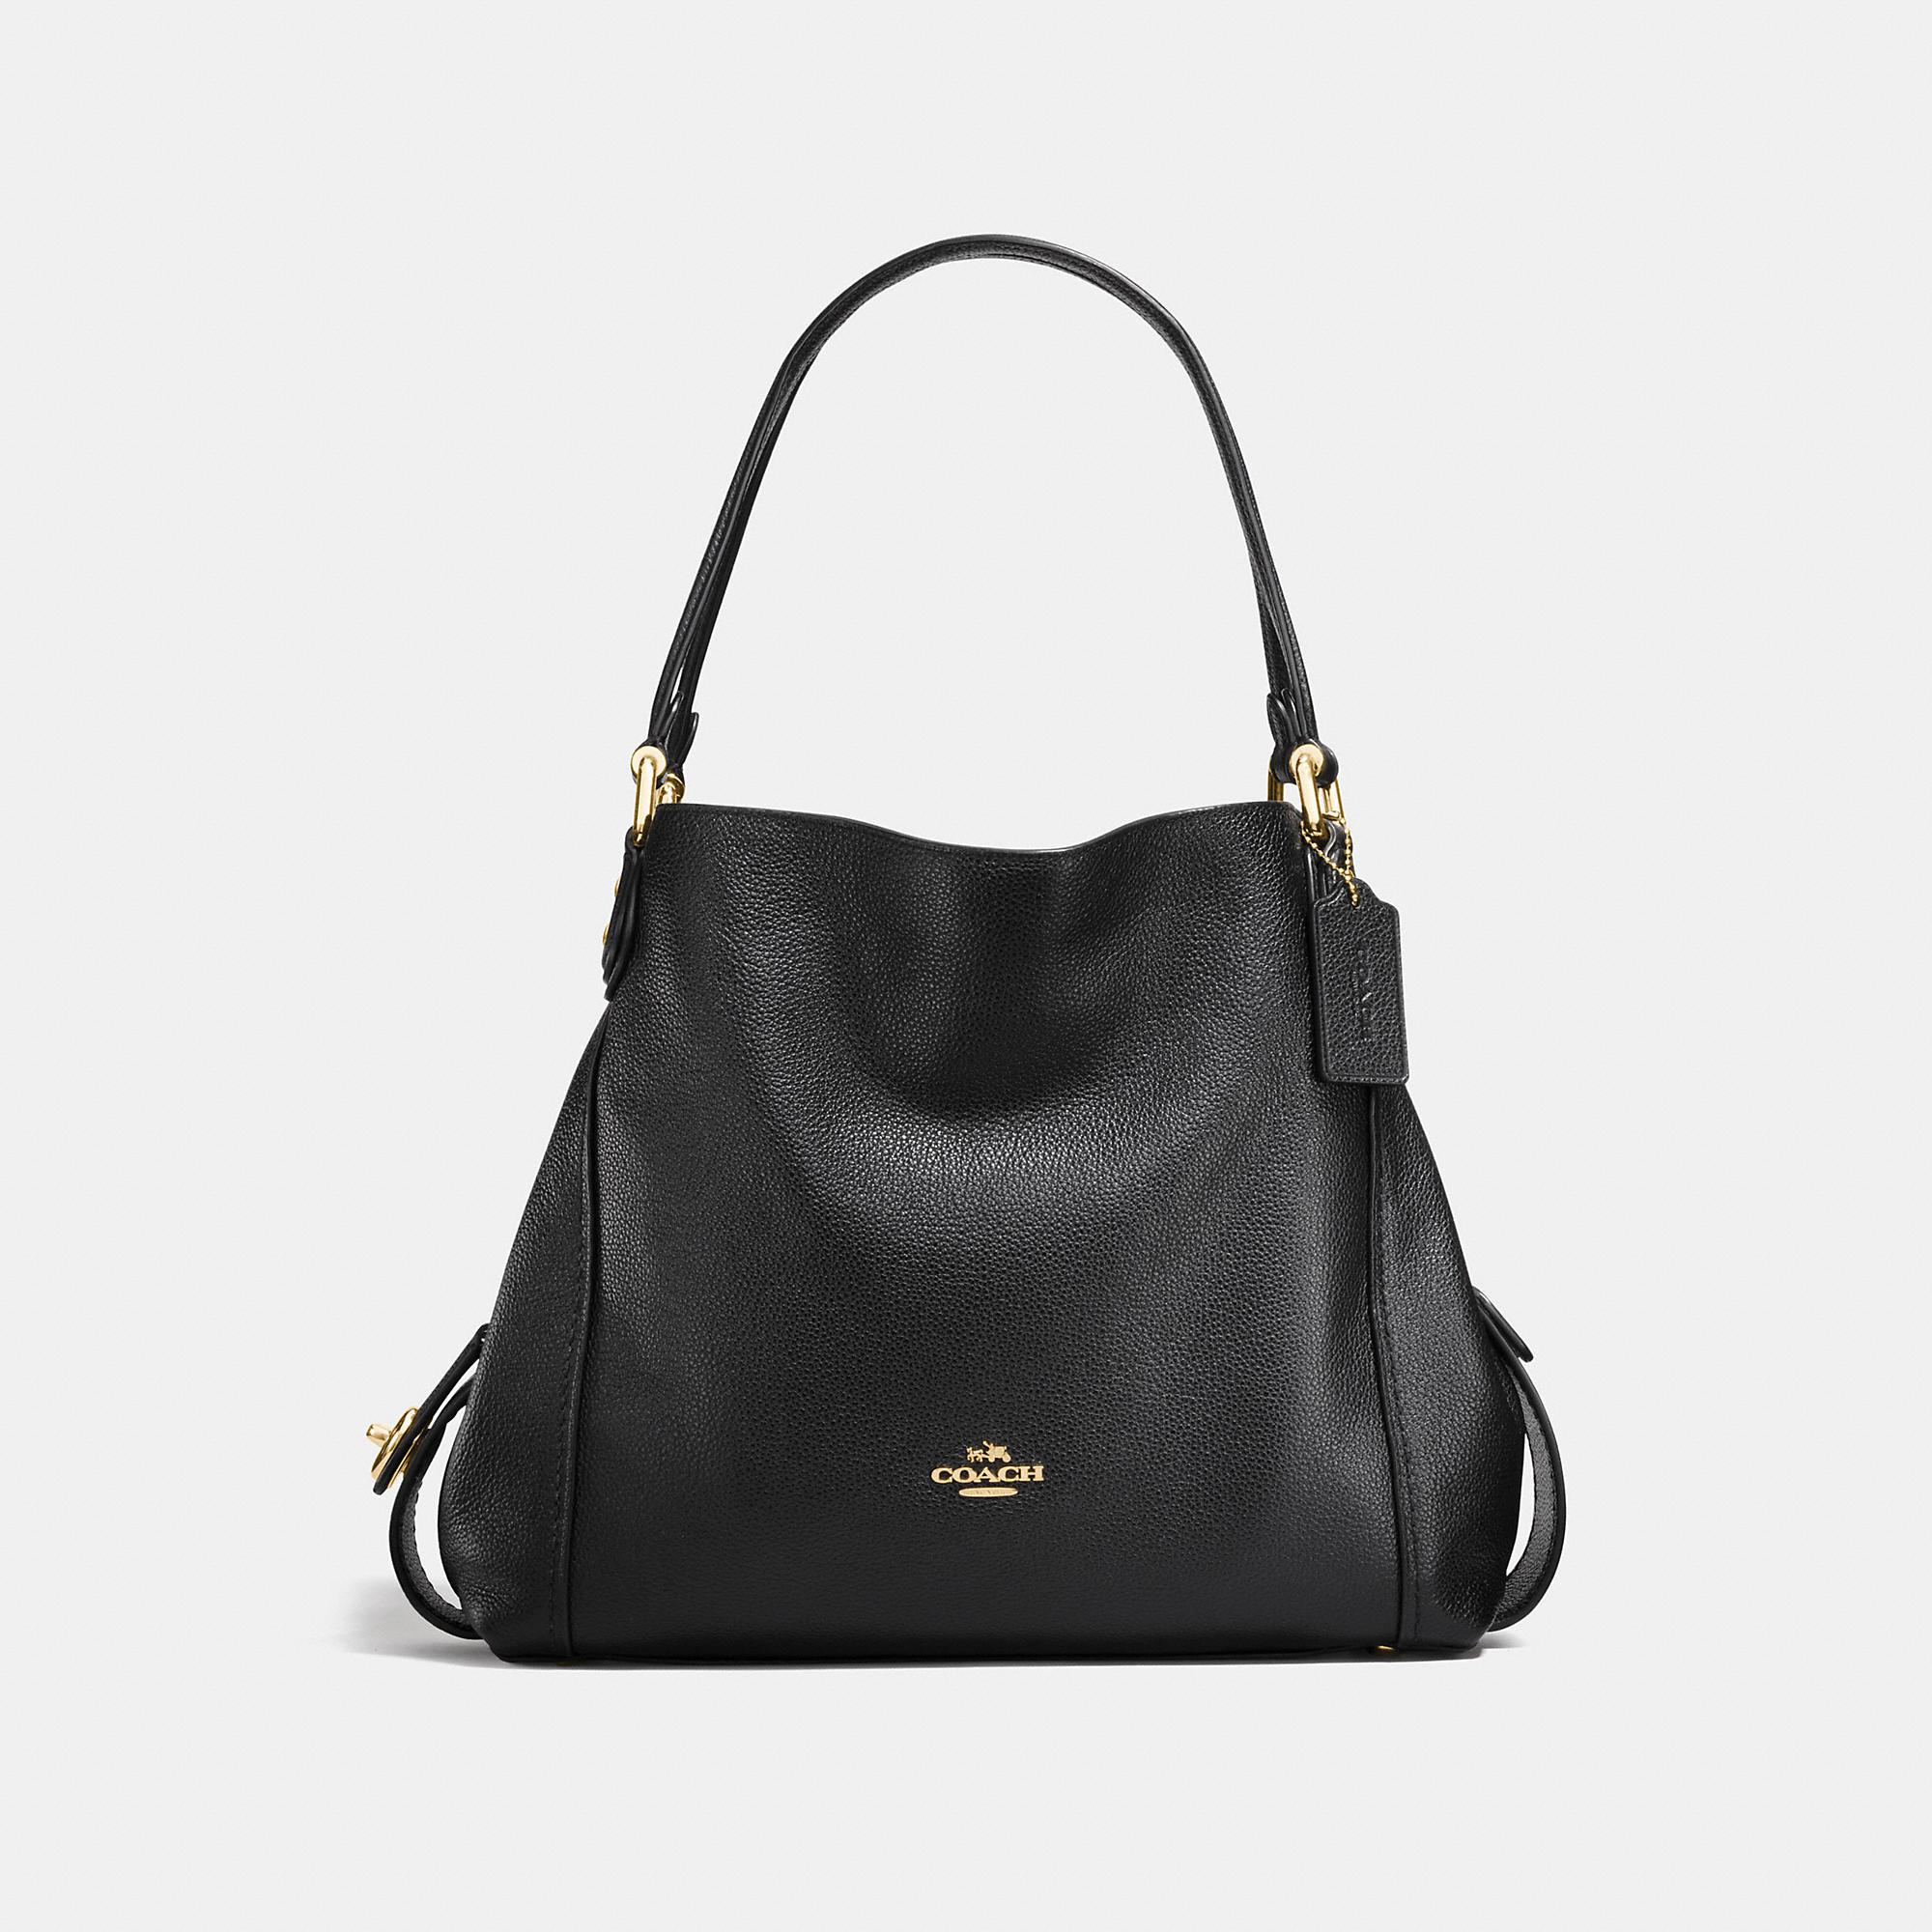 Lyst - COACH Edie Shoulder Bag 31 In Polished Pebble Leather